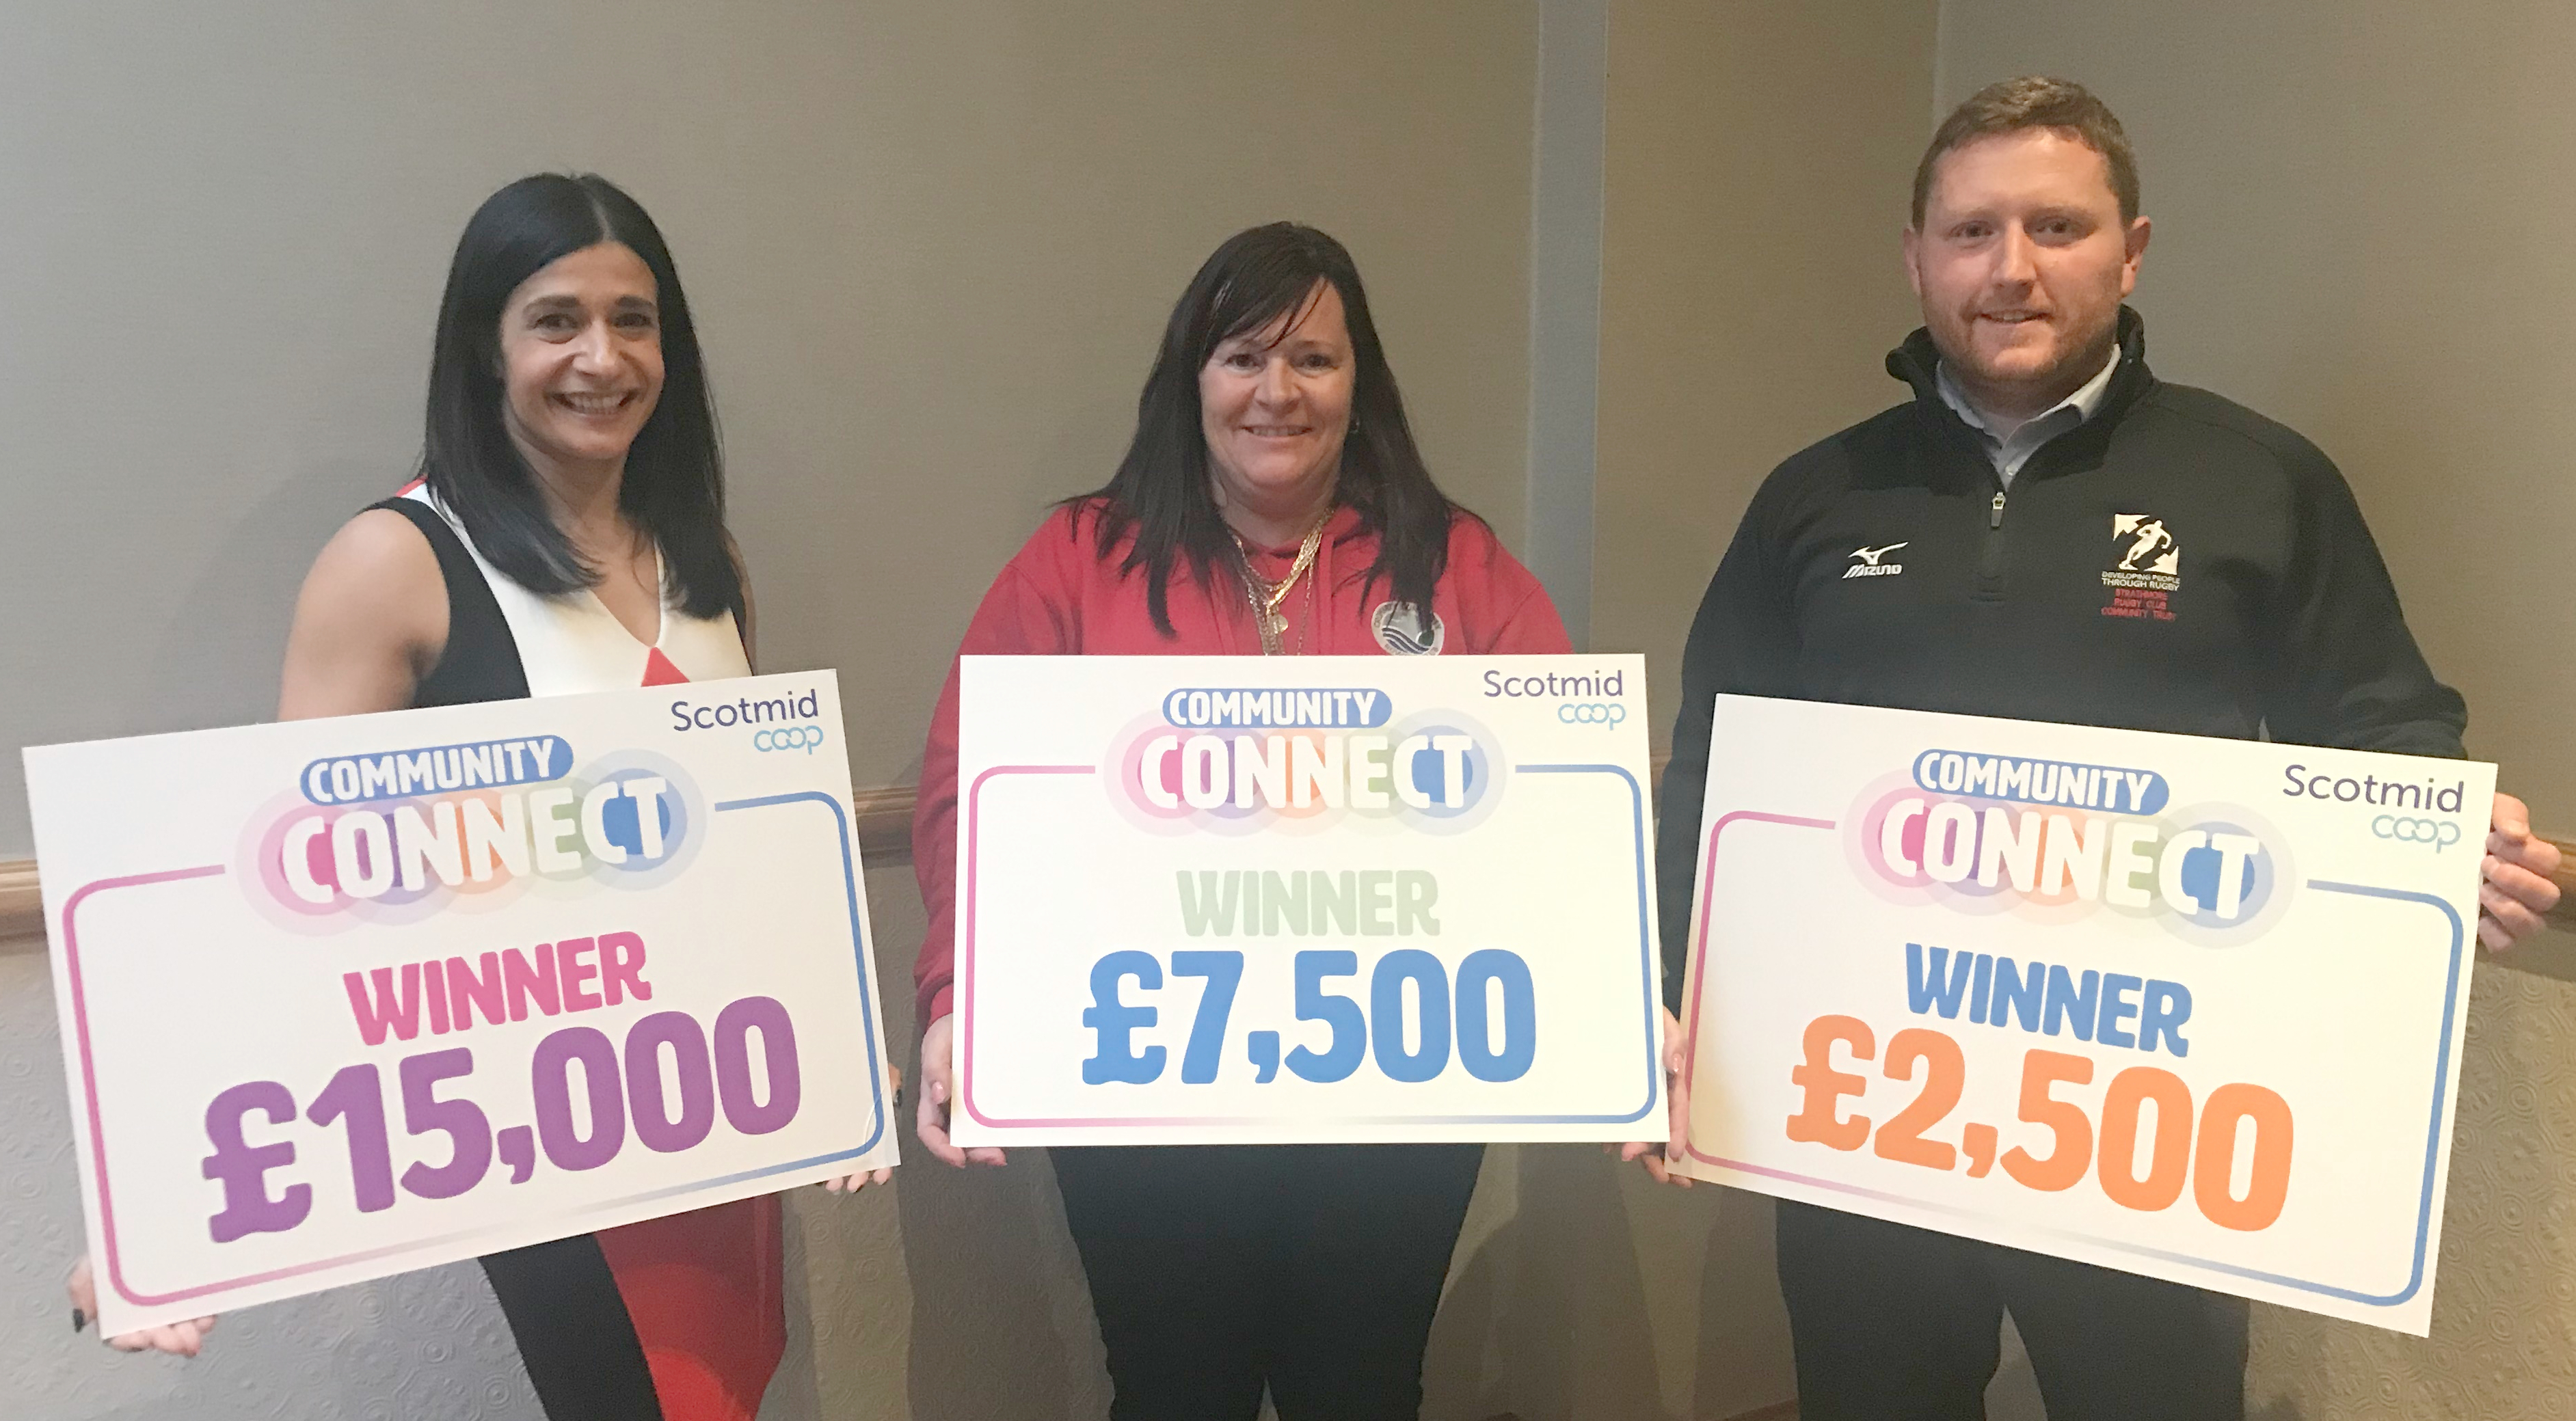 Home-Start Kincardine’s Laura Lambert, Cromarty Community Rowing Club’s Wanda Mackay and The Strathmore Rugby Club’s Community Trust’s Josh Gabriel-Clarke  celebrate receiving their Community Connect awards at the North Member AGM in Inverness